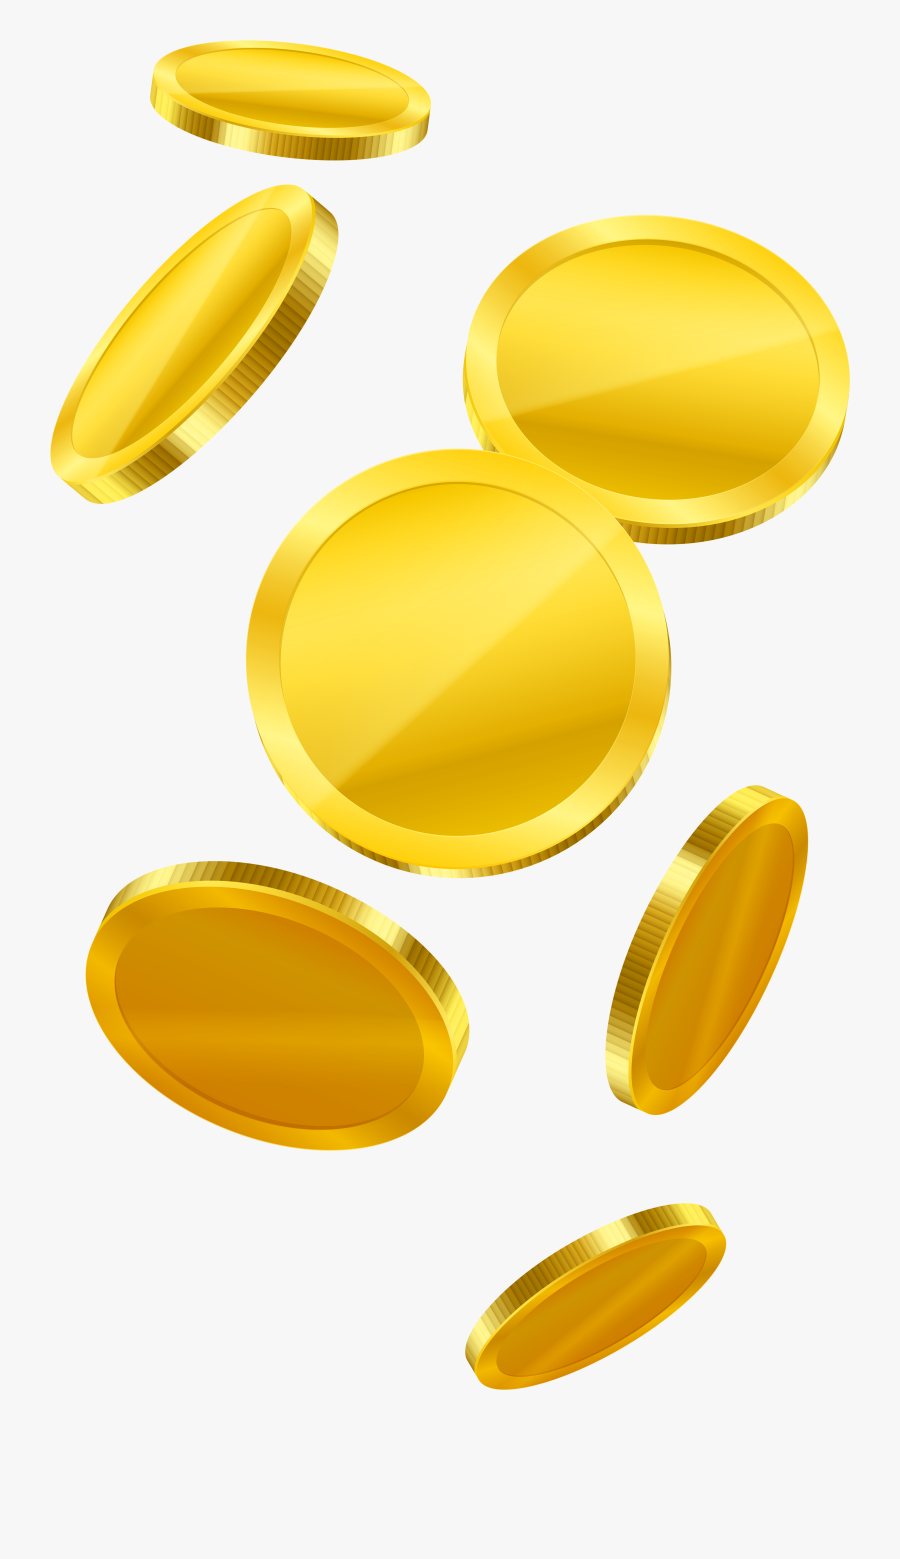 Gold Falling Coins Png Clipart - Amber, Transparent Clipart